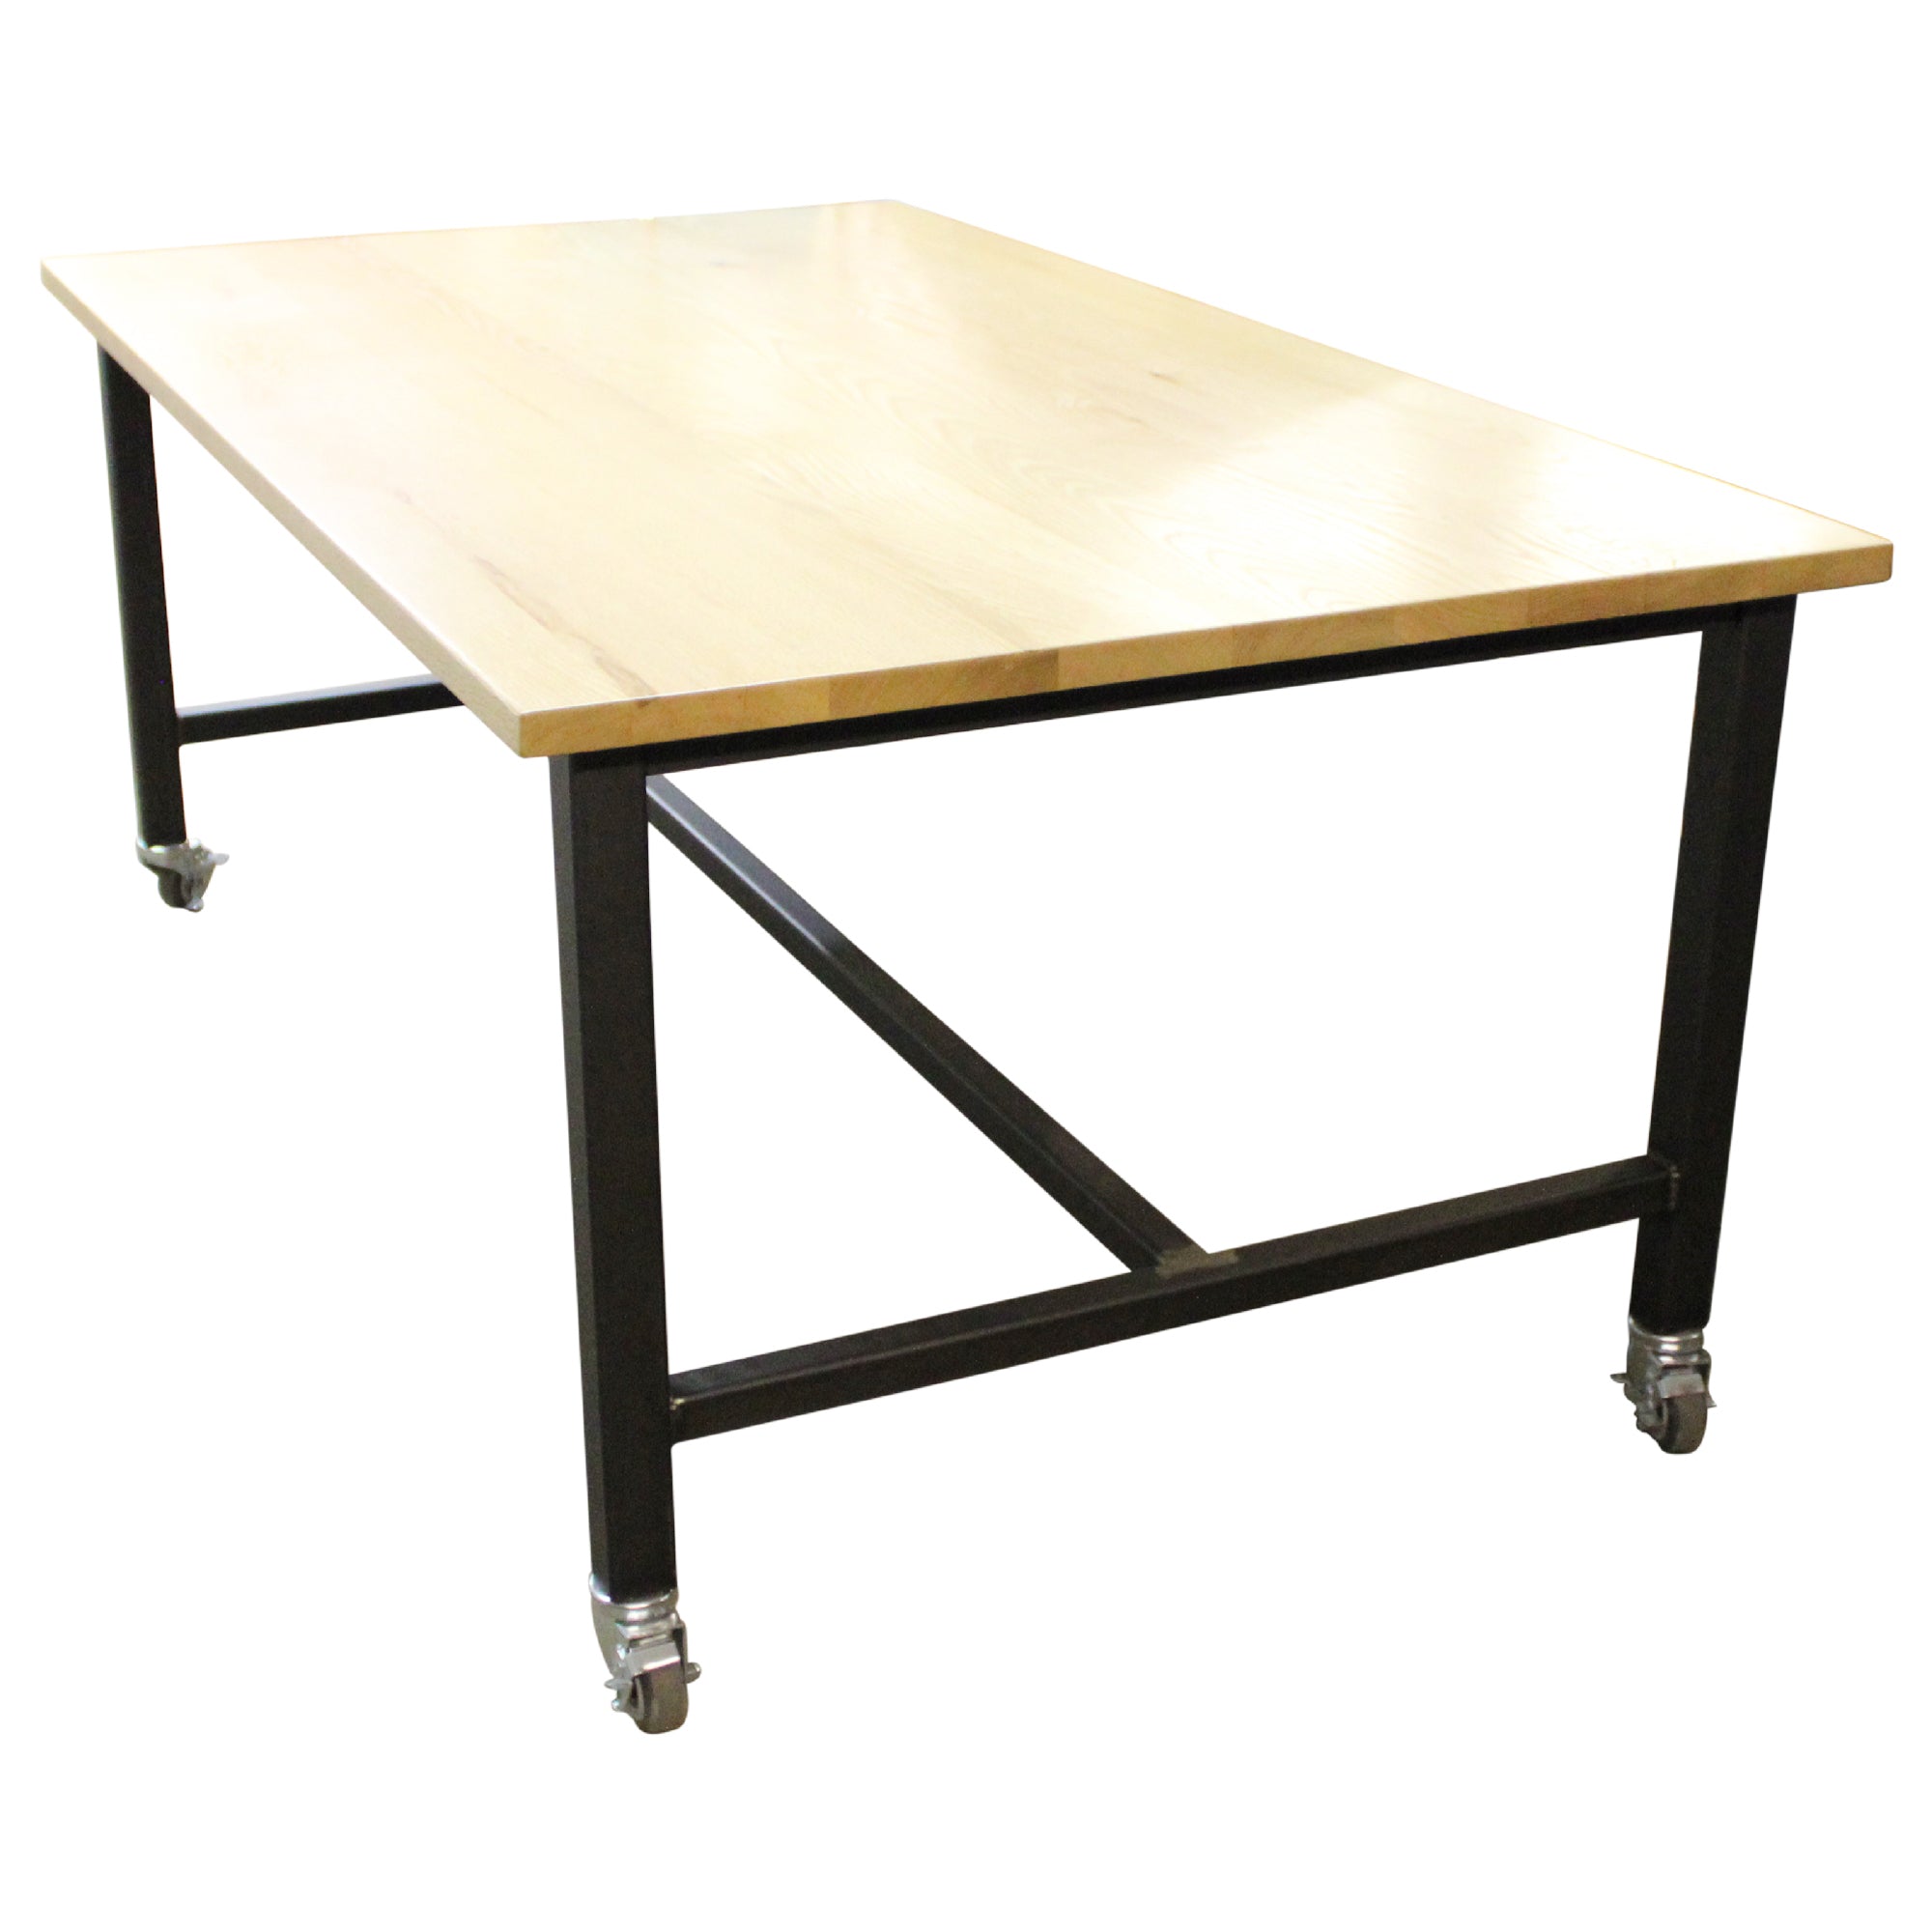 Industrial Collaboration Table w/ Casters, Maple - Preowned